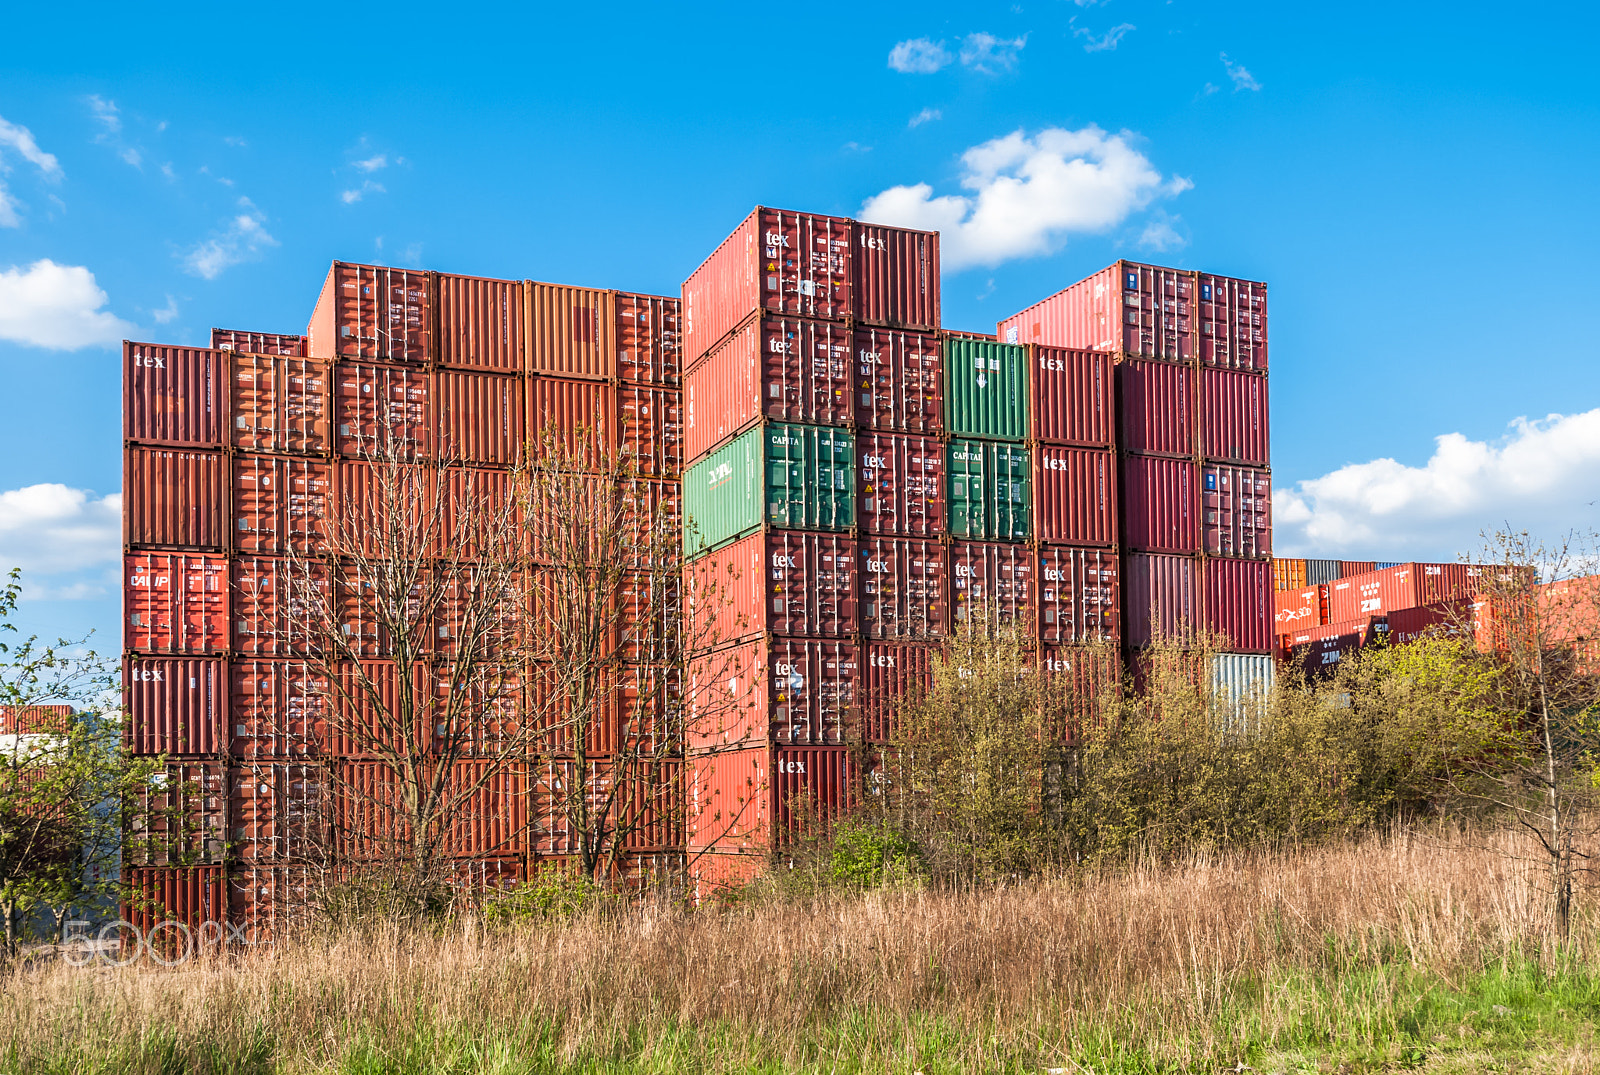 Nikon D80 sample photo. Hamburg, germany - may 1, 2013: cargo container stacked at the port area. photography